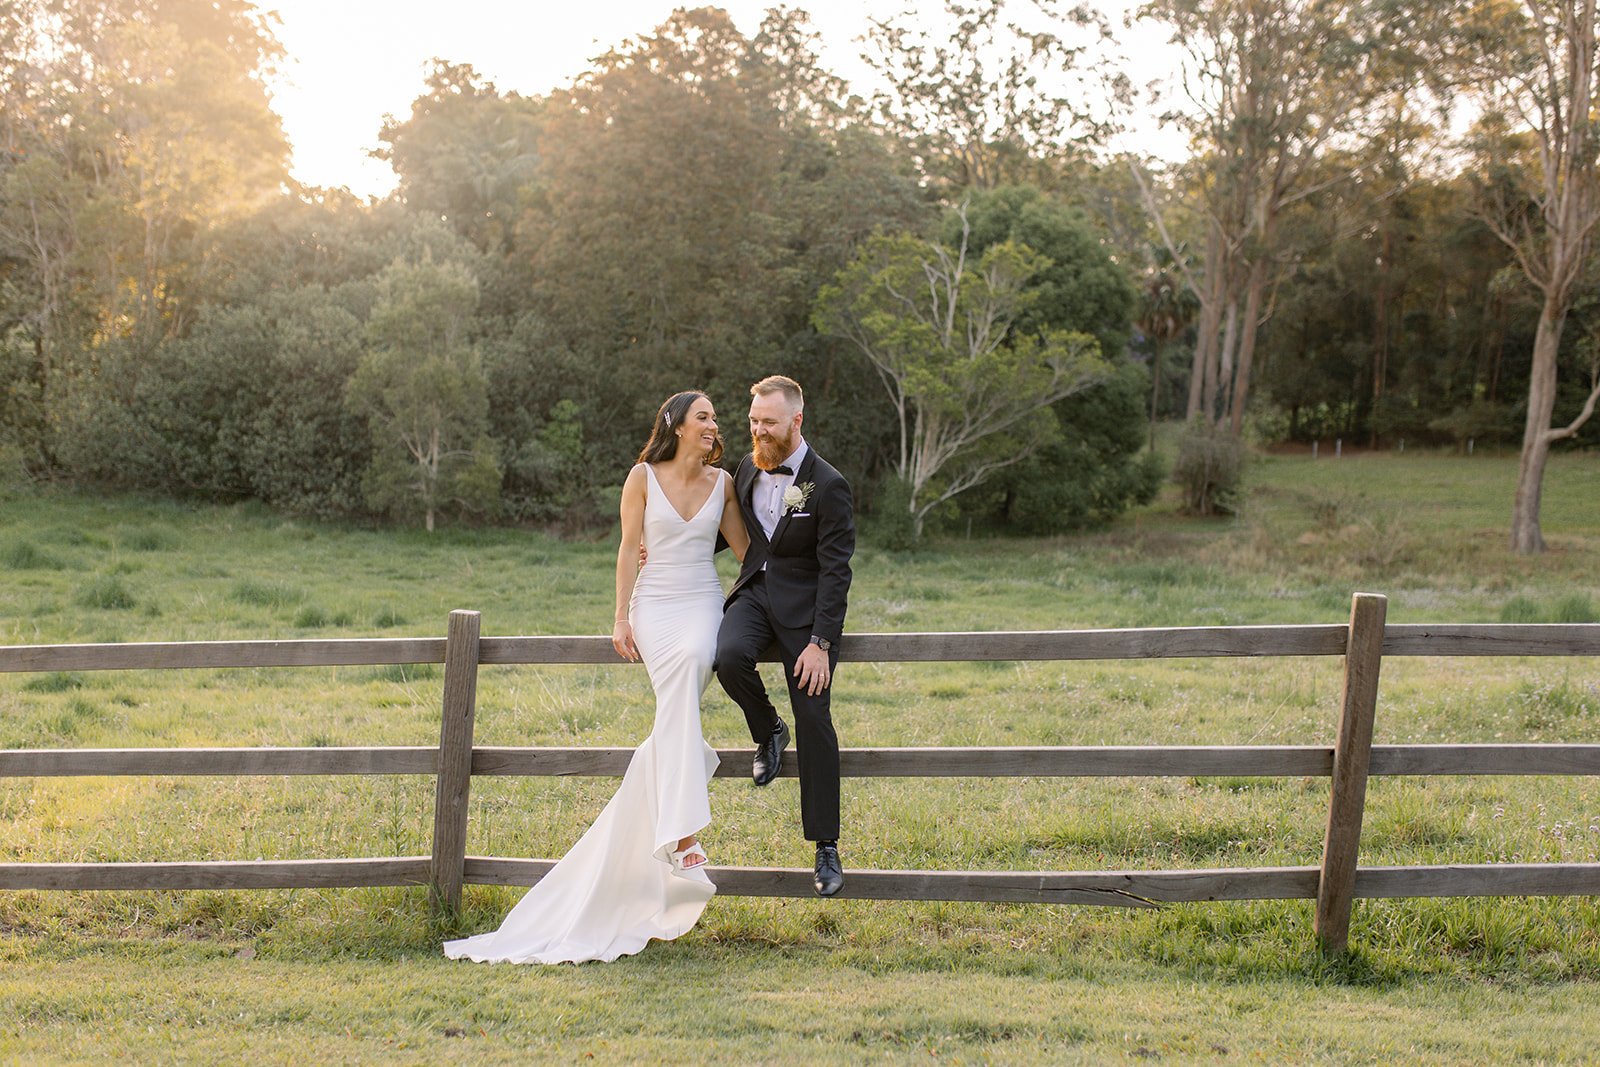 Sunshine Coast bride and groom sitting on a wooden fence with a glowing sunset behind them